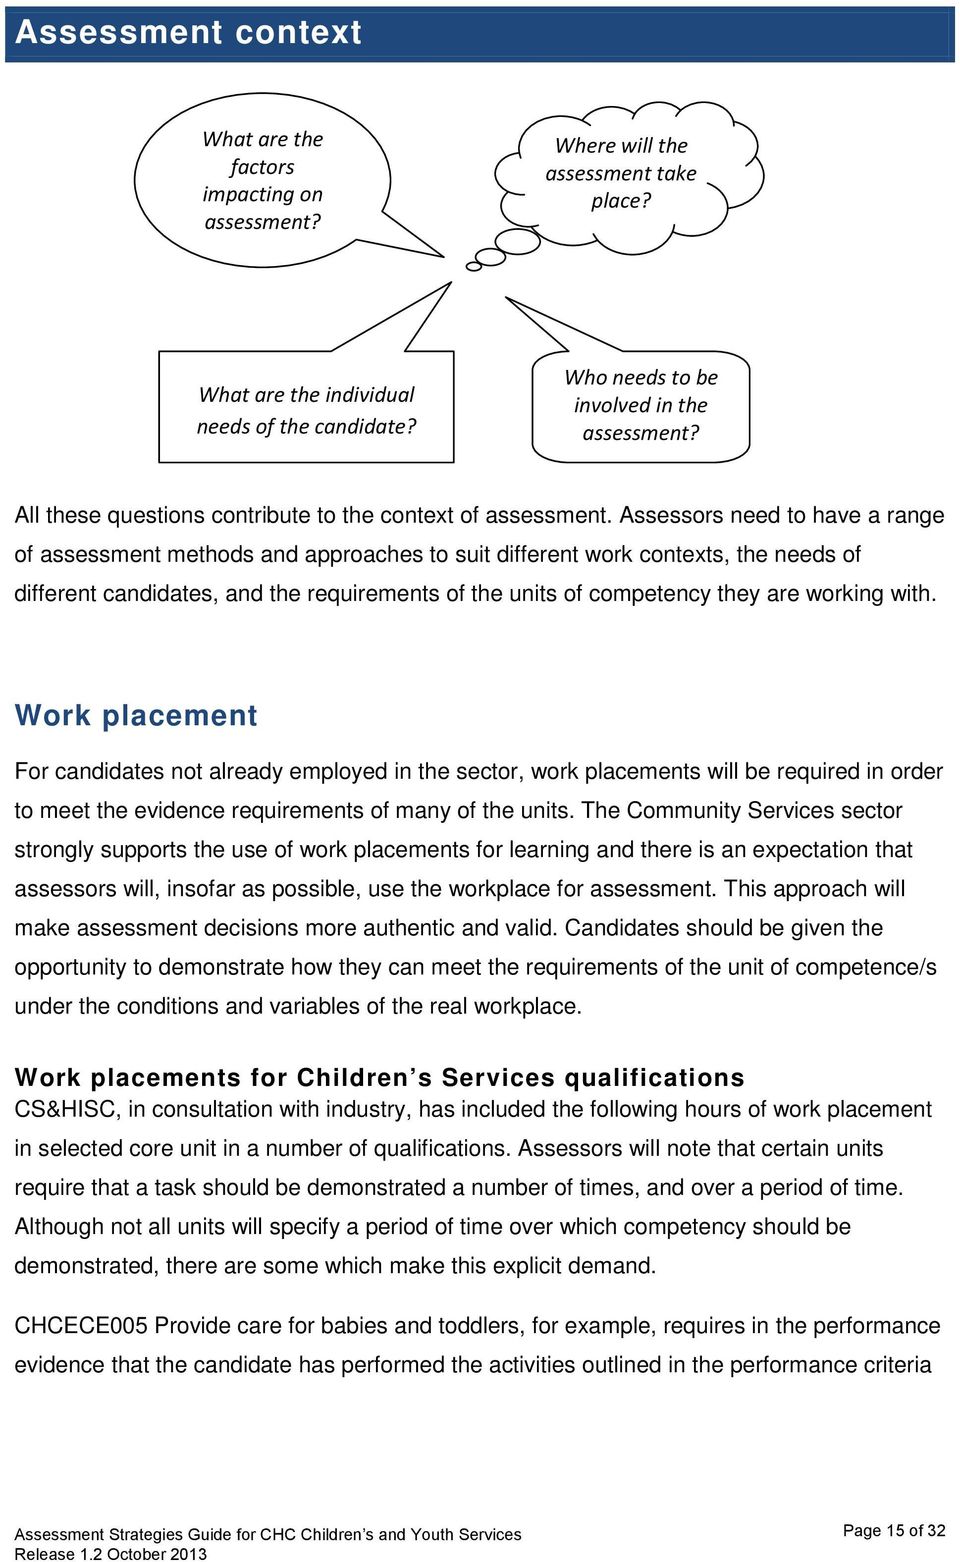 Assessors need to have a range of assessment methods and approaches to suit different work contexts, the needs of different candidates, and the requirements of the units of competency they are